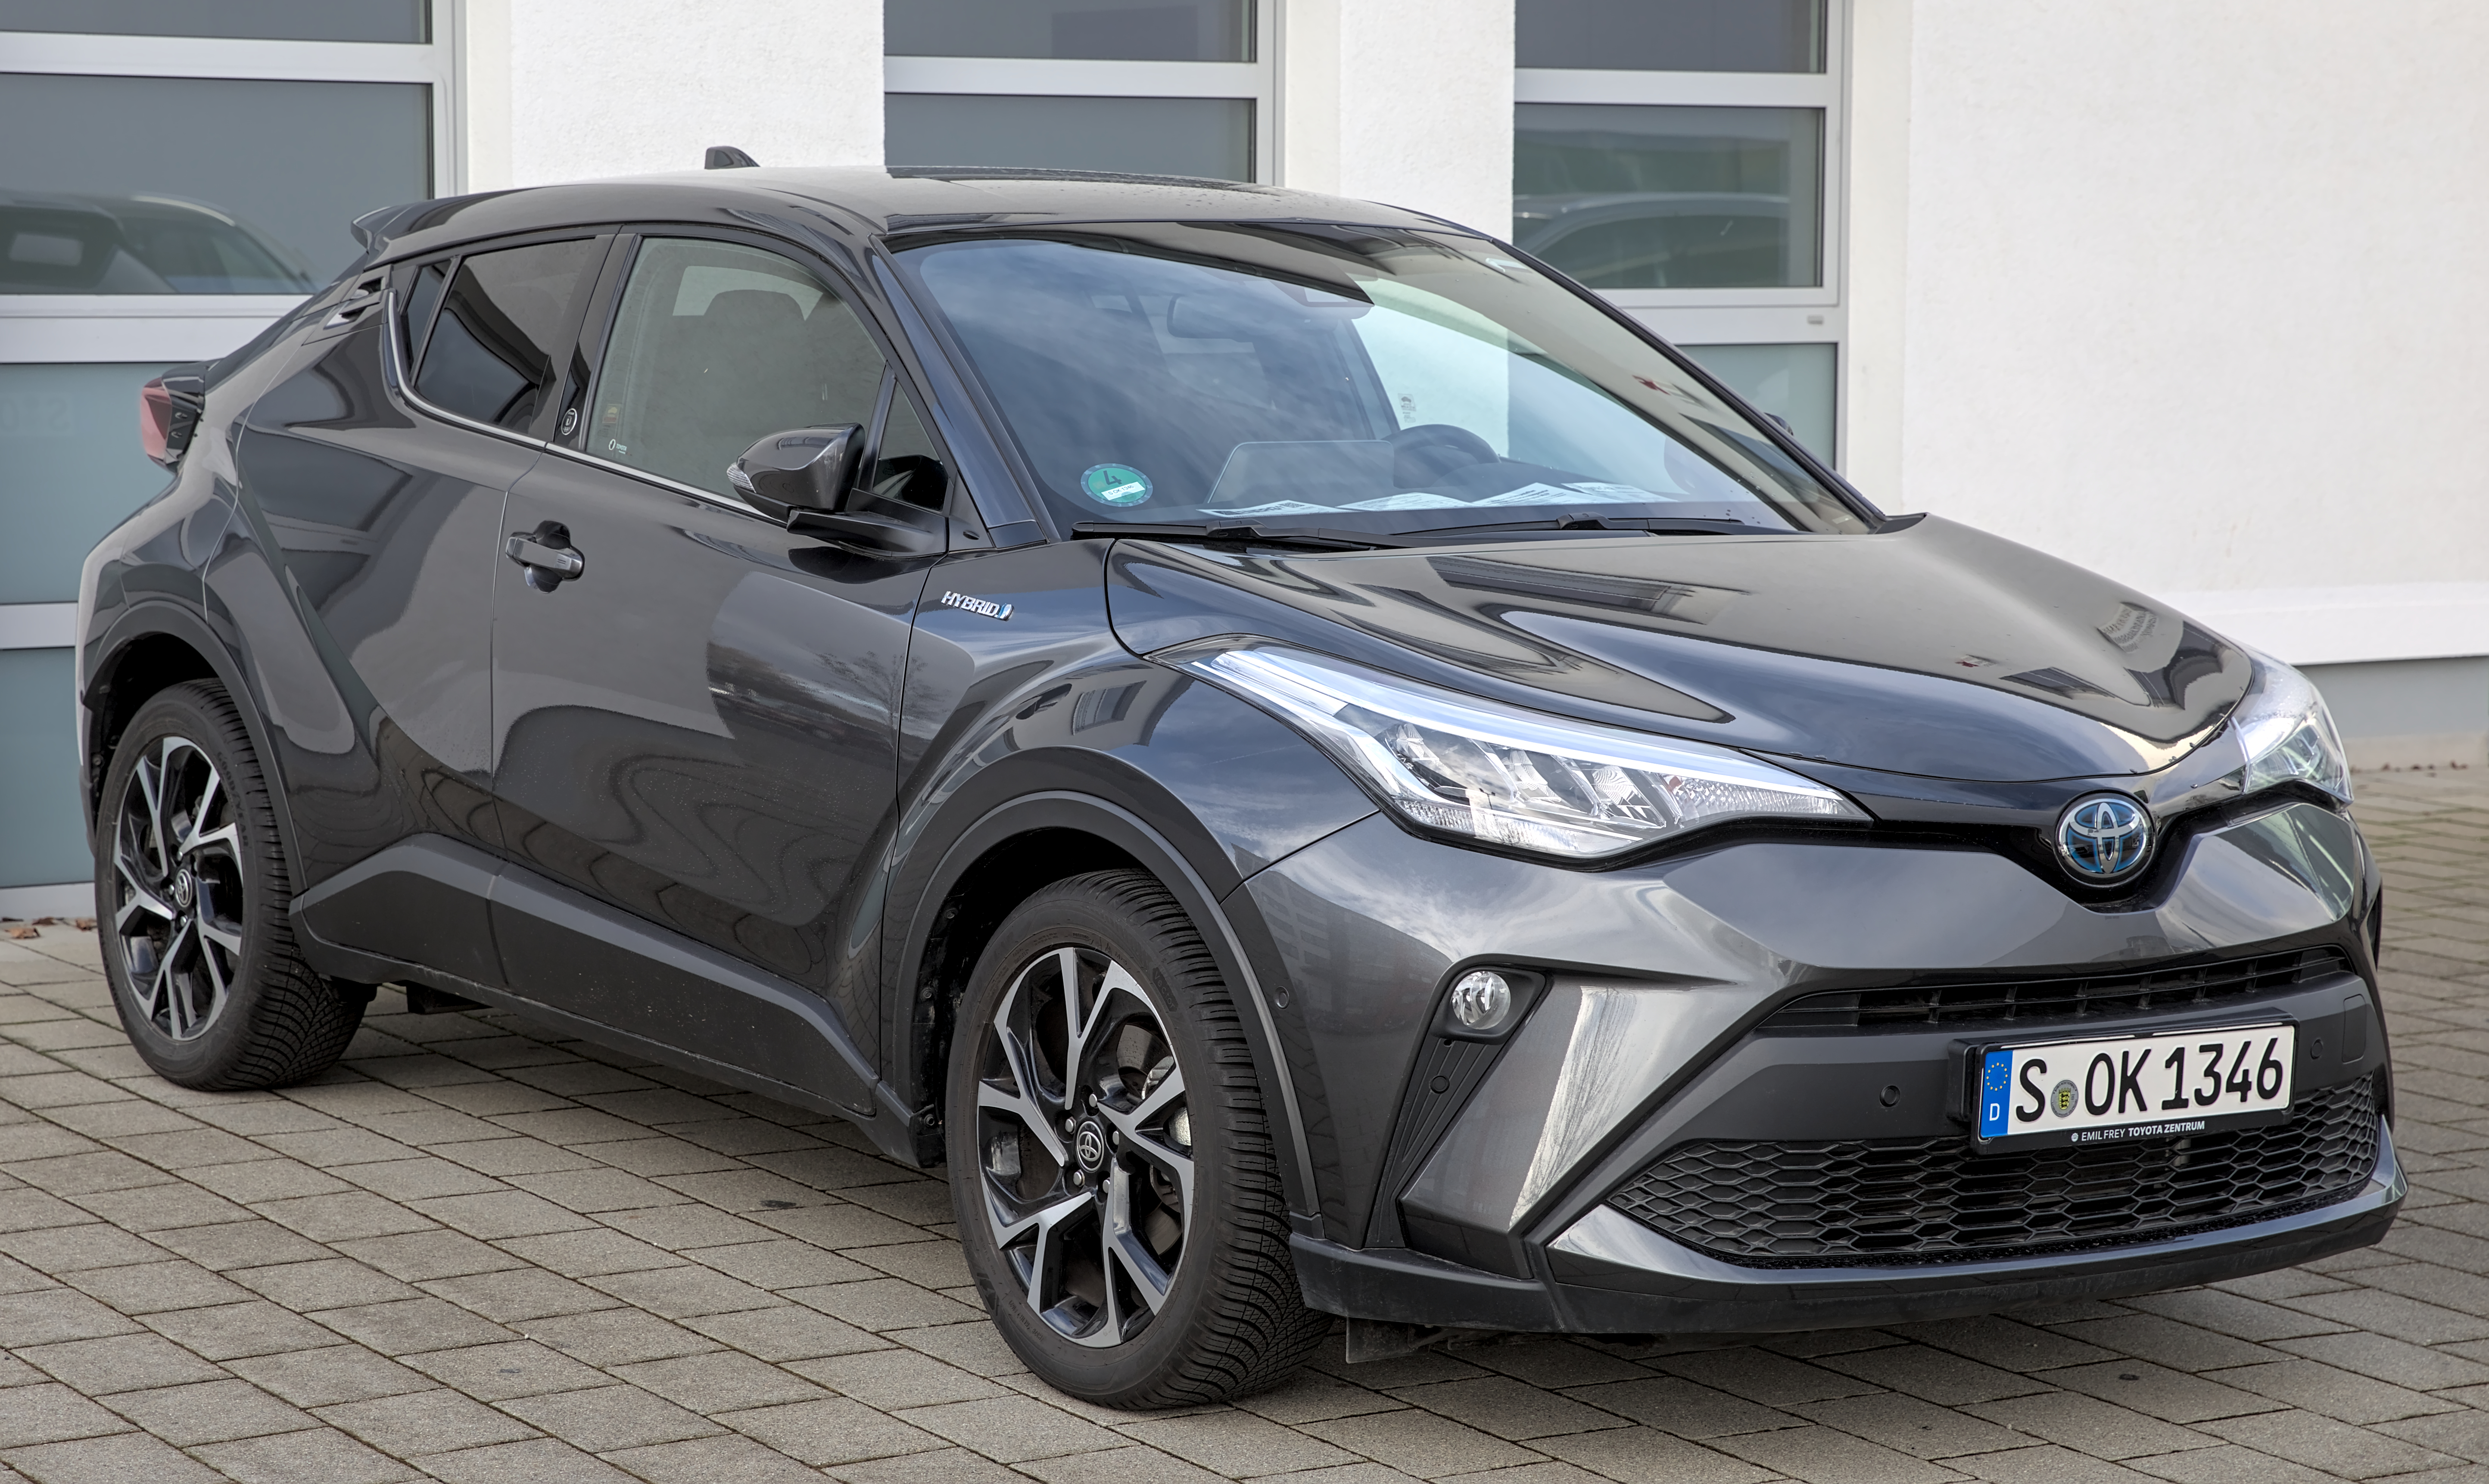 2024 Toyota C-HR Will Come With Electrified Engines